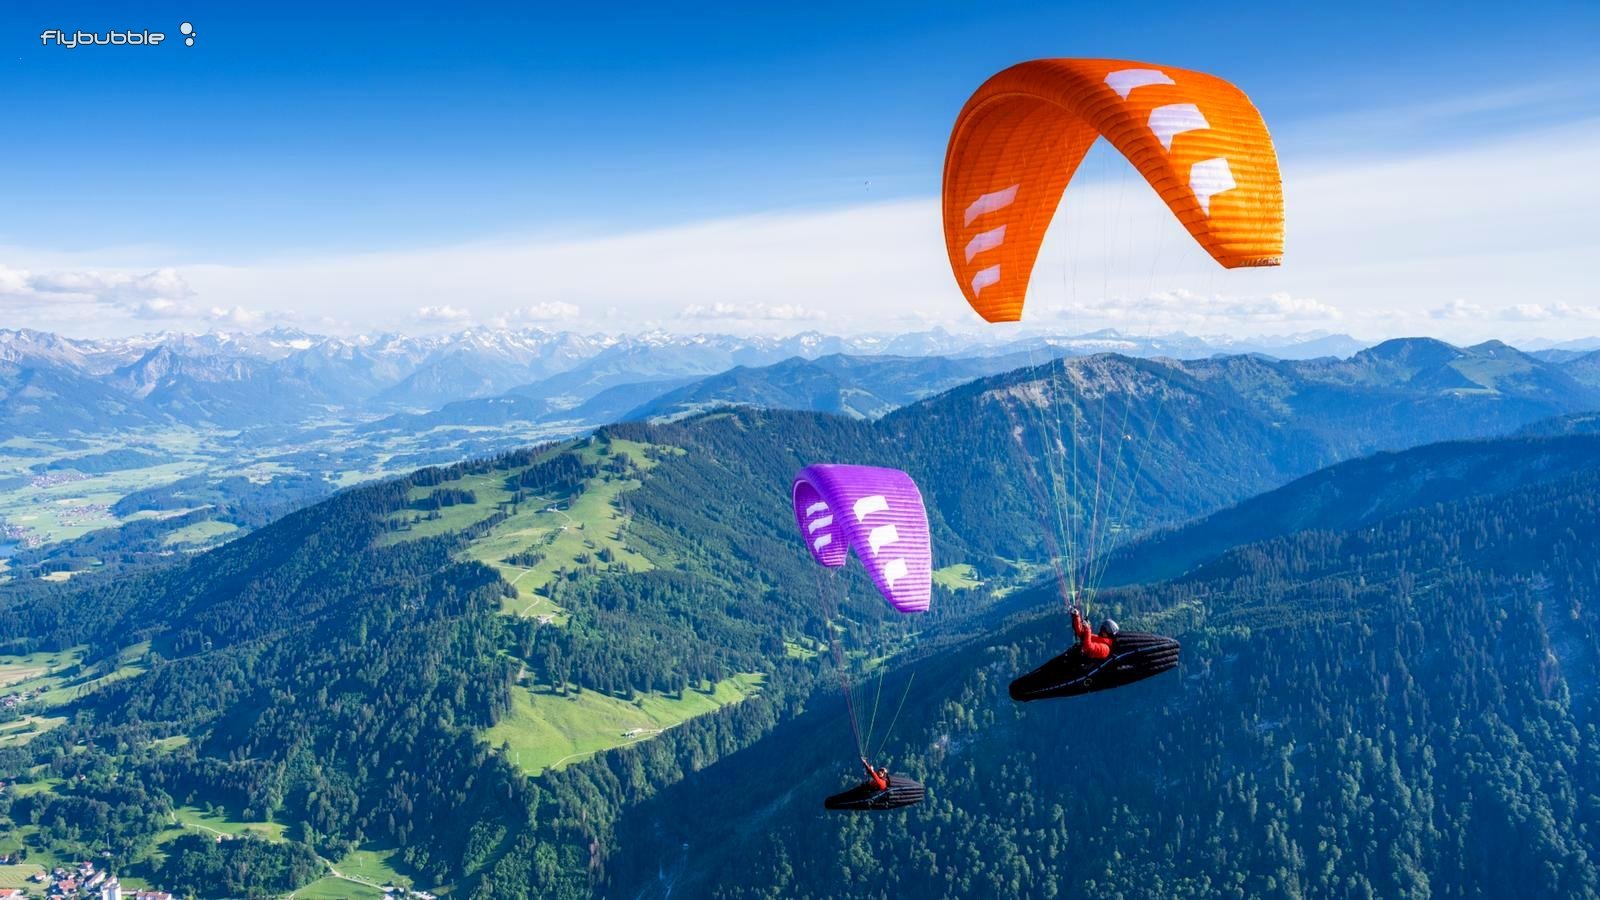 Paraglider weight ranges: the numbers